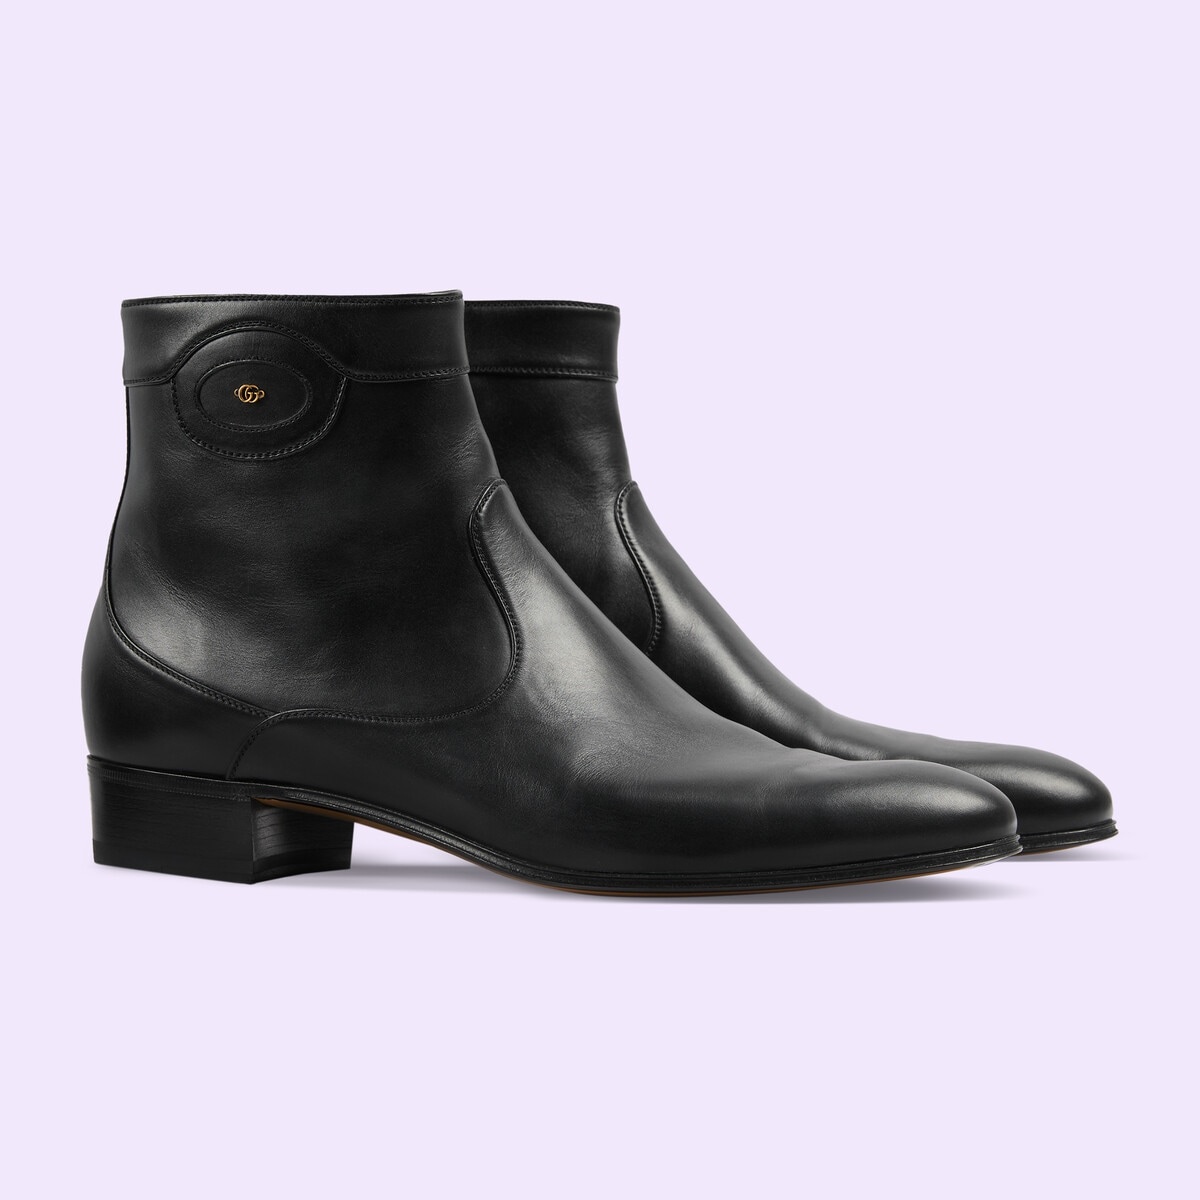 Men's ankle boot with Double G - 2